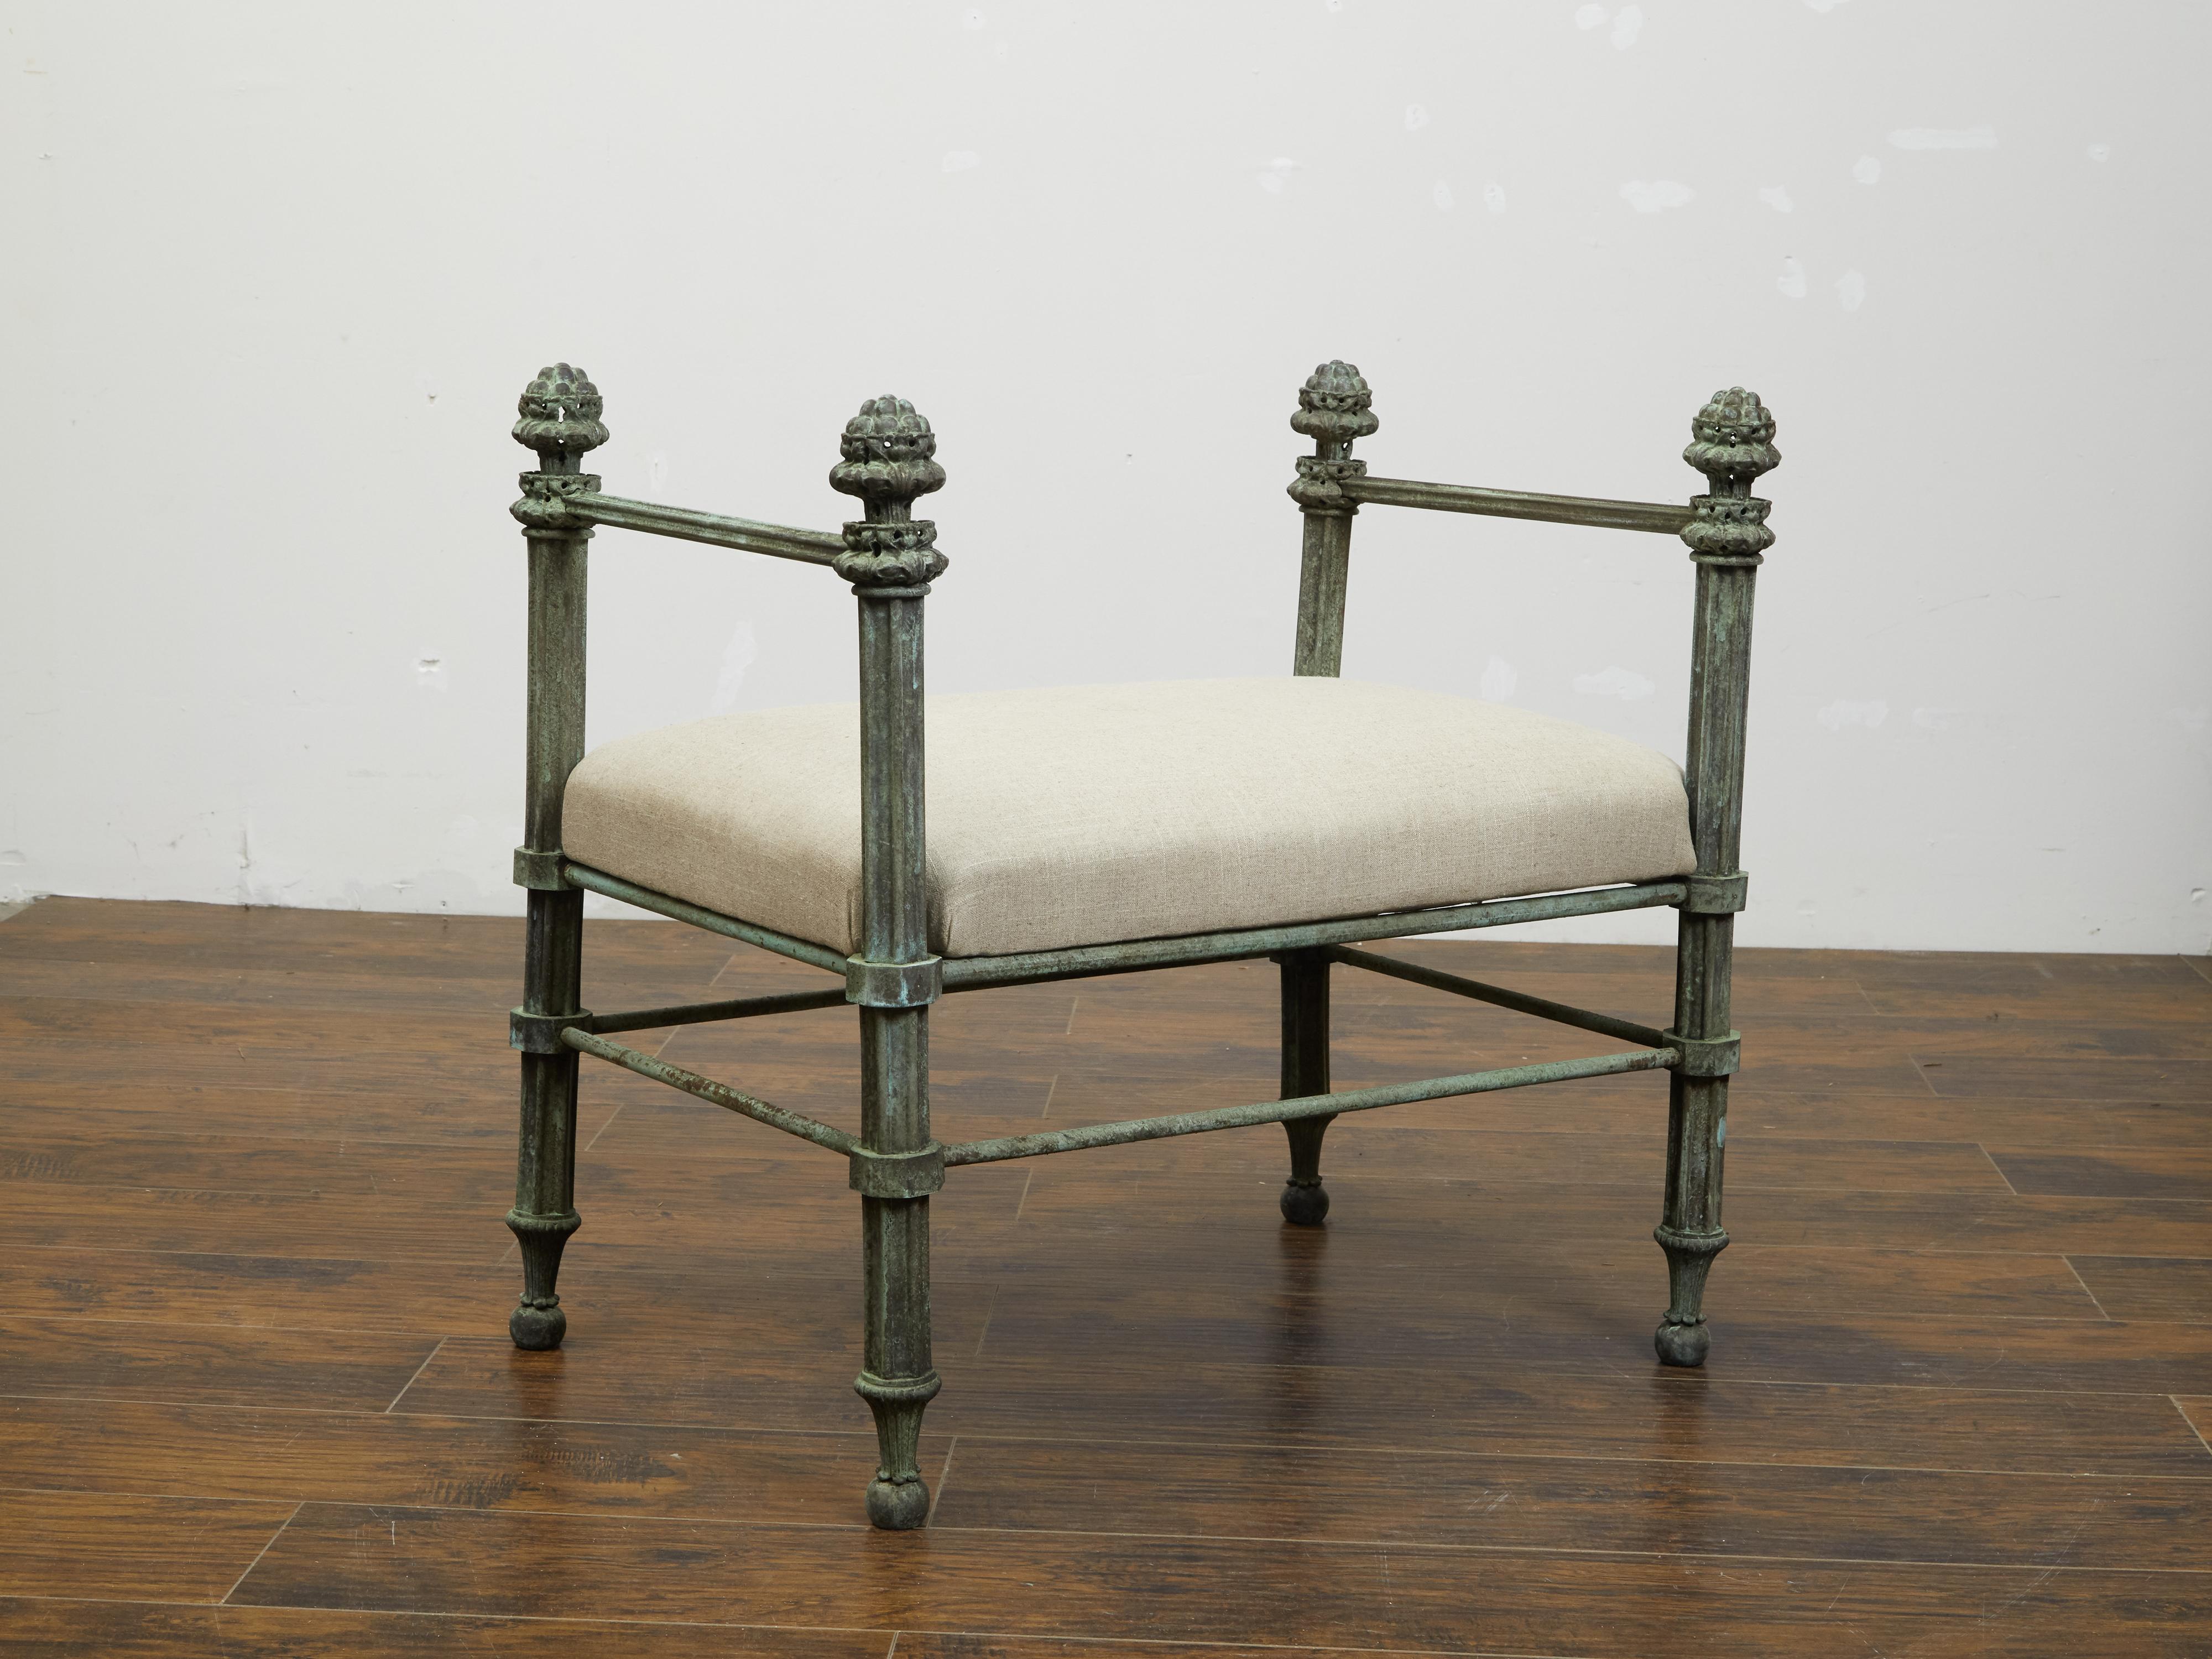 An English bronze bench from the 19th century, with fluted supports, finials and new upholstery. Created in England during the 19th century, this bronze bench features a rectangular seat newly recovered with a neutral toned fabric highlighting the